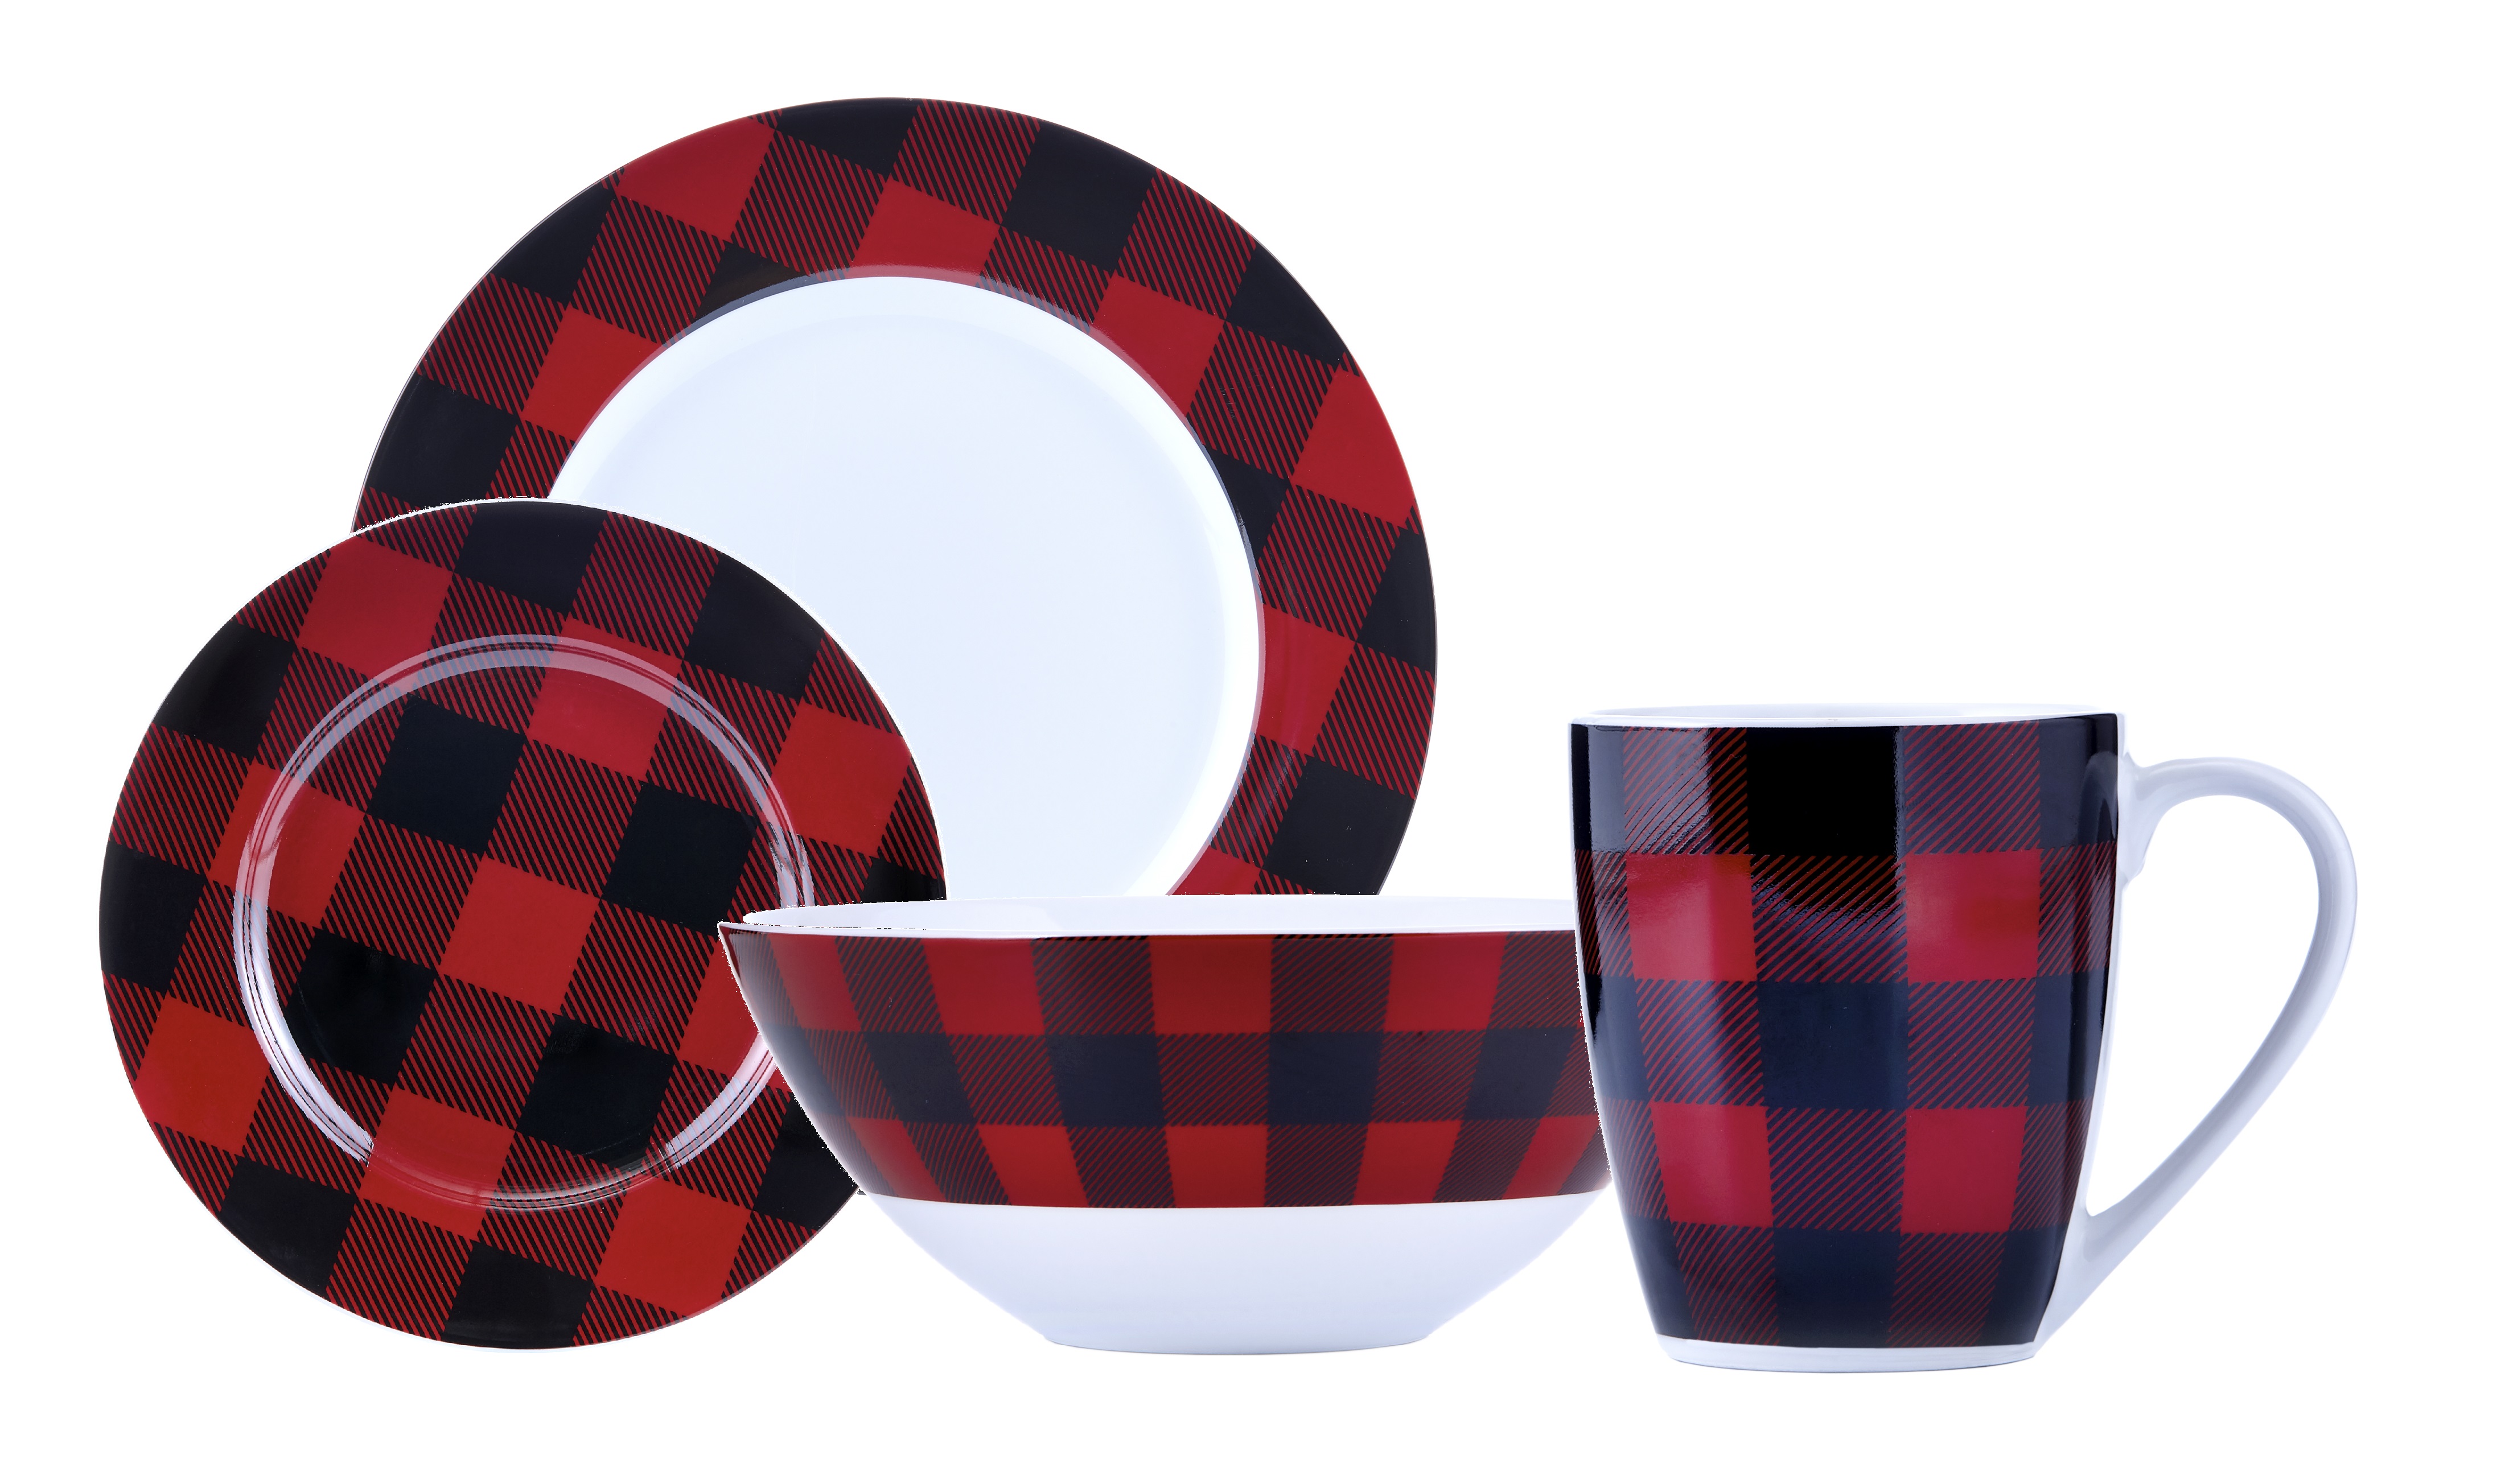 Red and black dishes